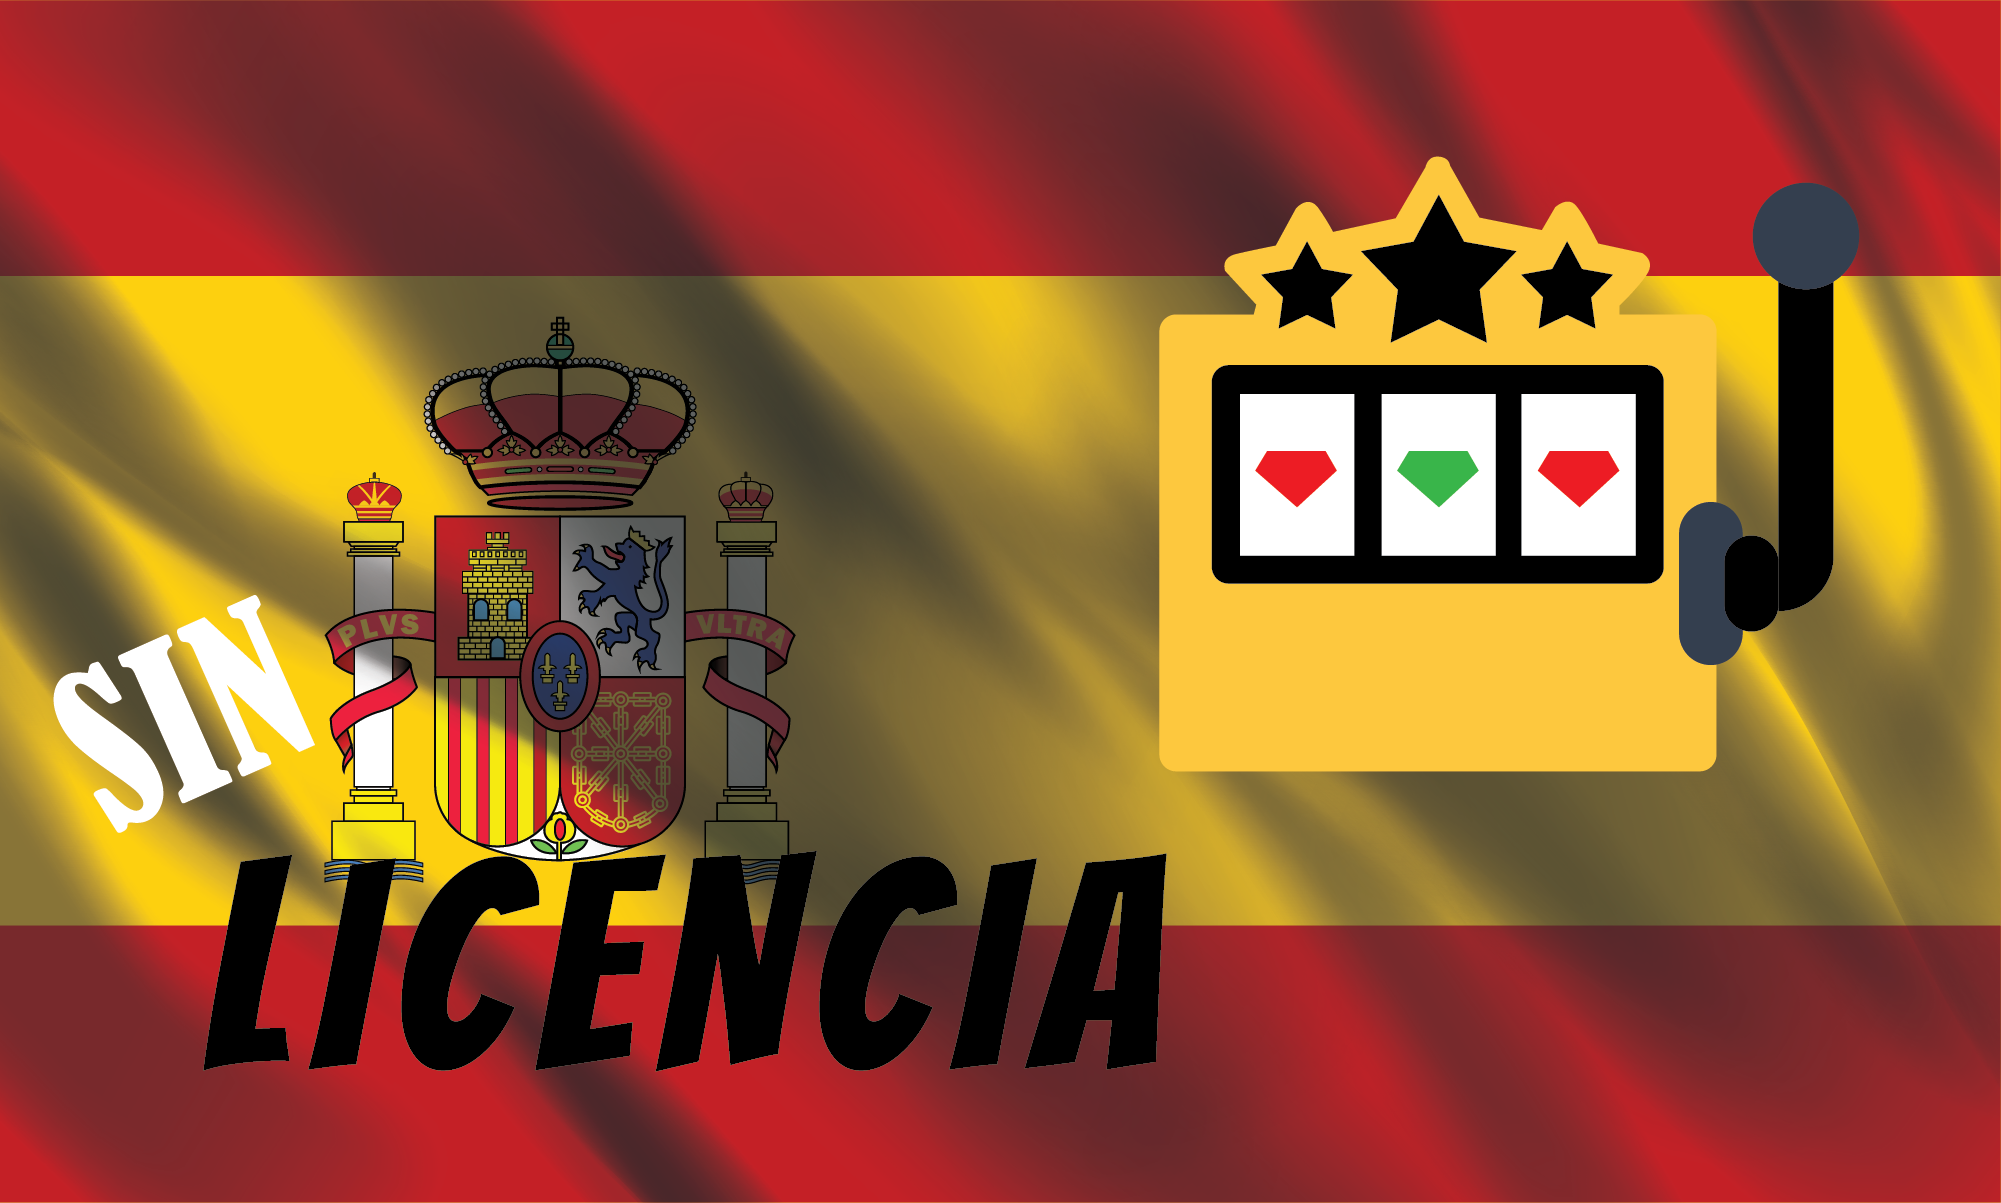 How To Save Money with casino sin licencia?